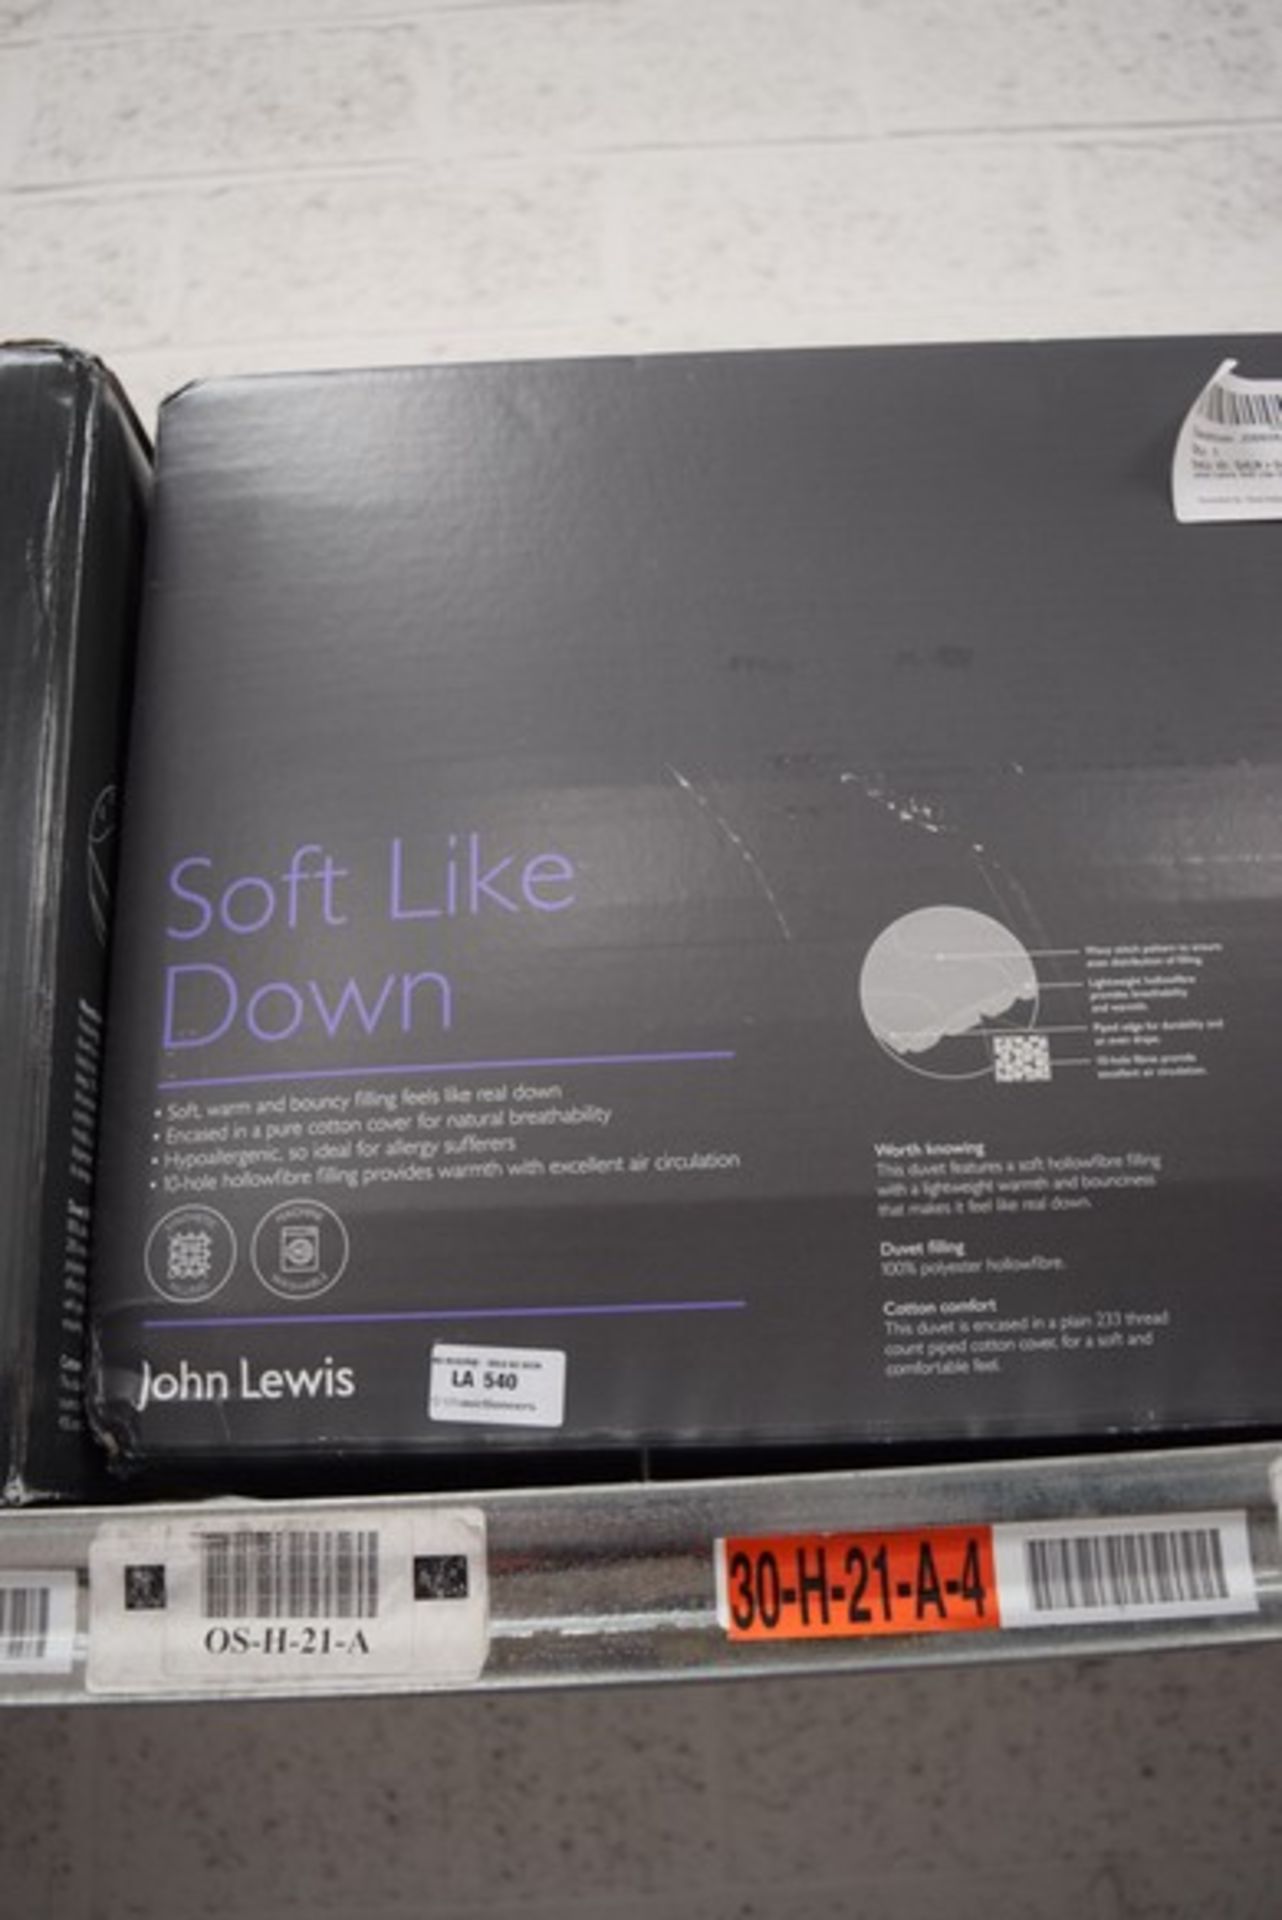 1 x DESIGNER SOFT LIKE DOWN 13.5 TOG DUVET IN KING SIZE RRP £90 18.07.17 *PLEASE NOTE THAT THE BID